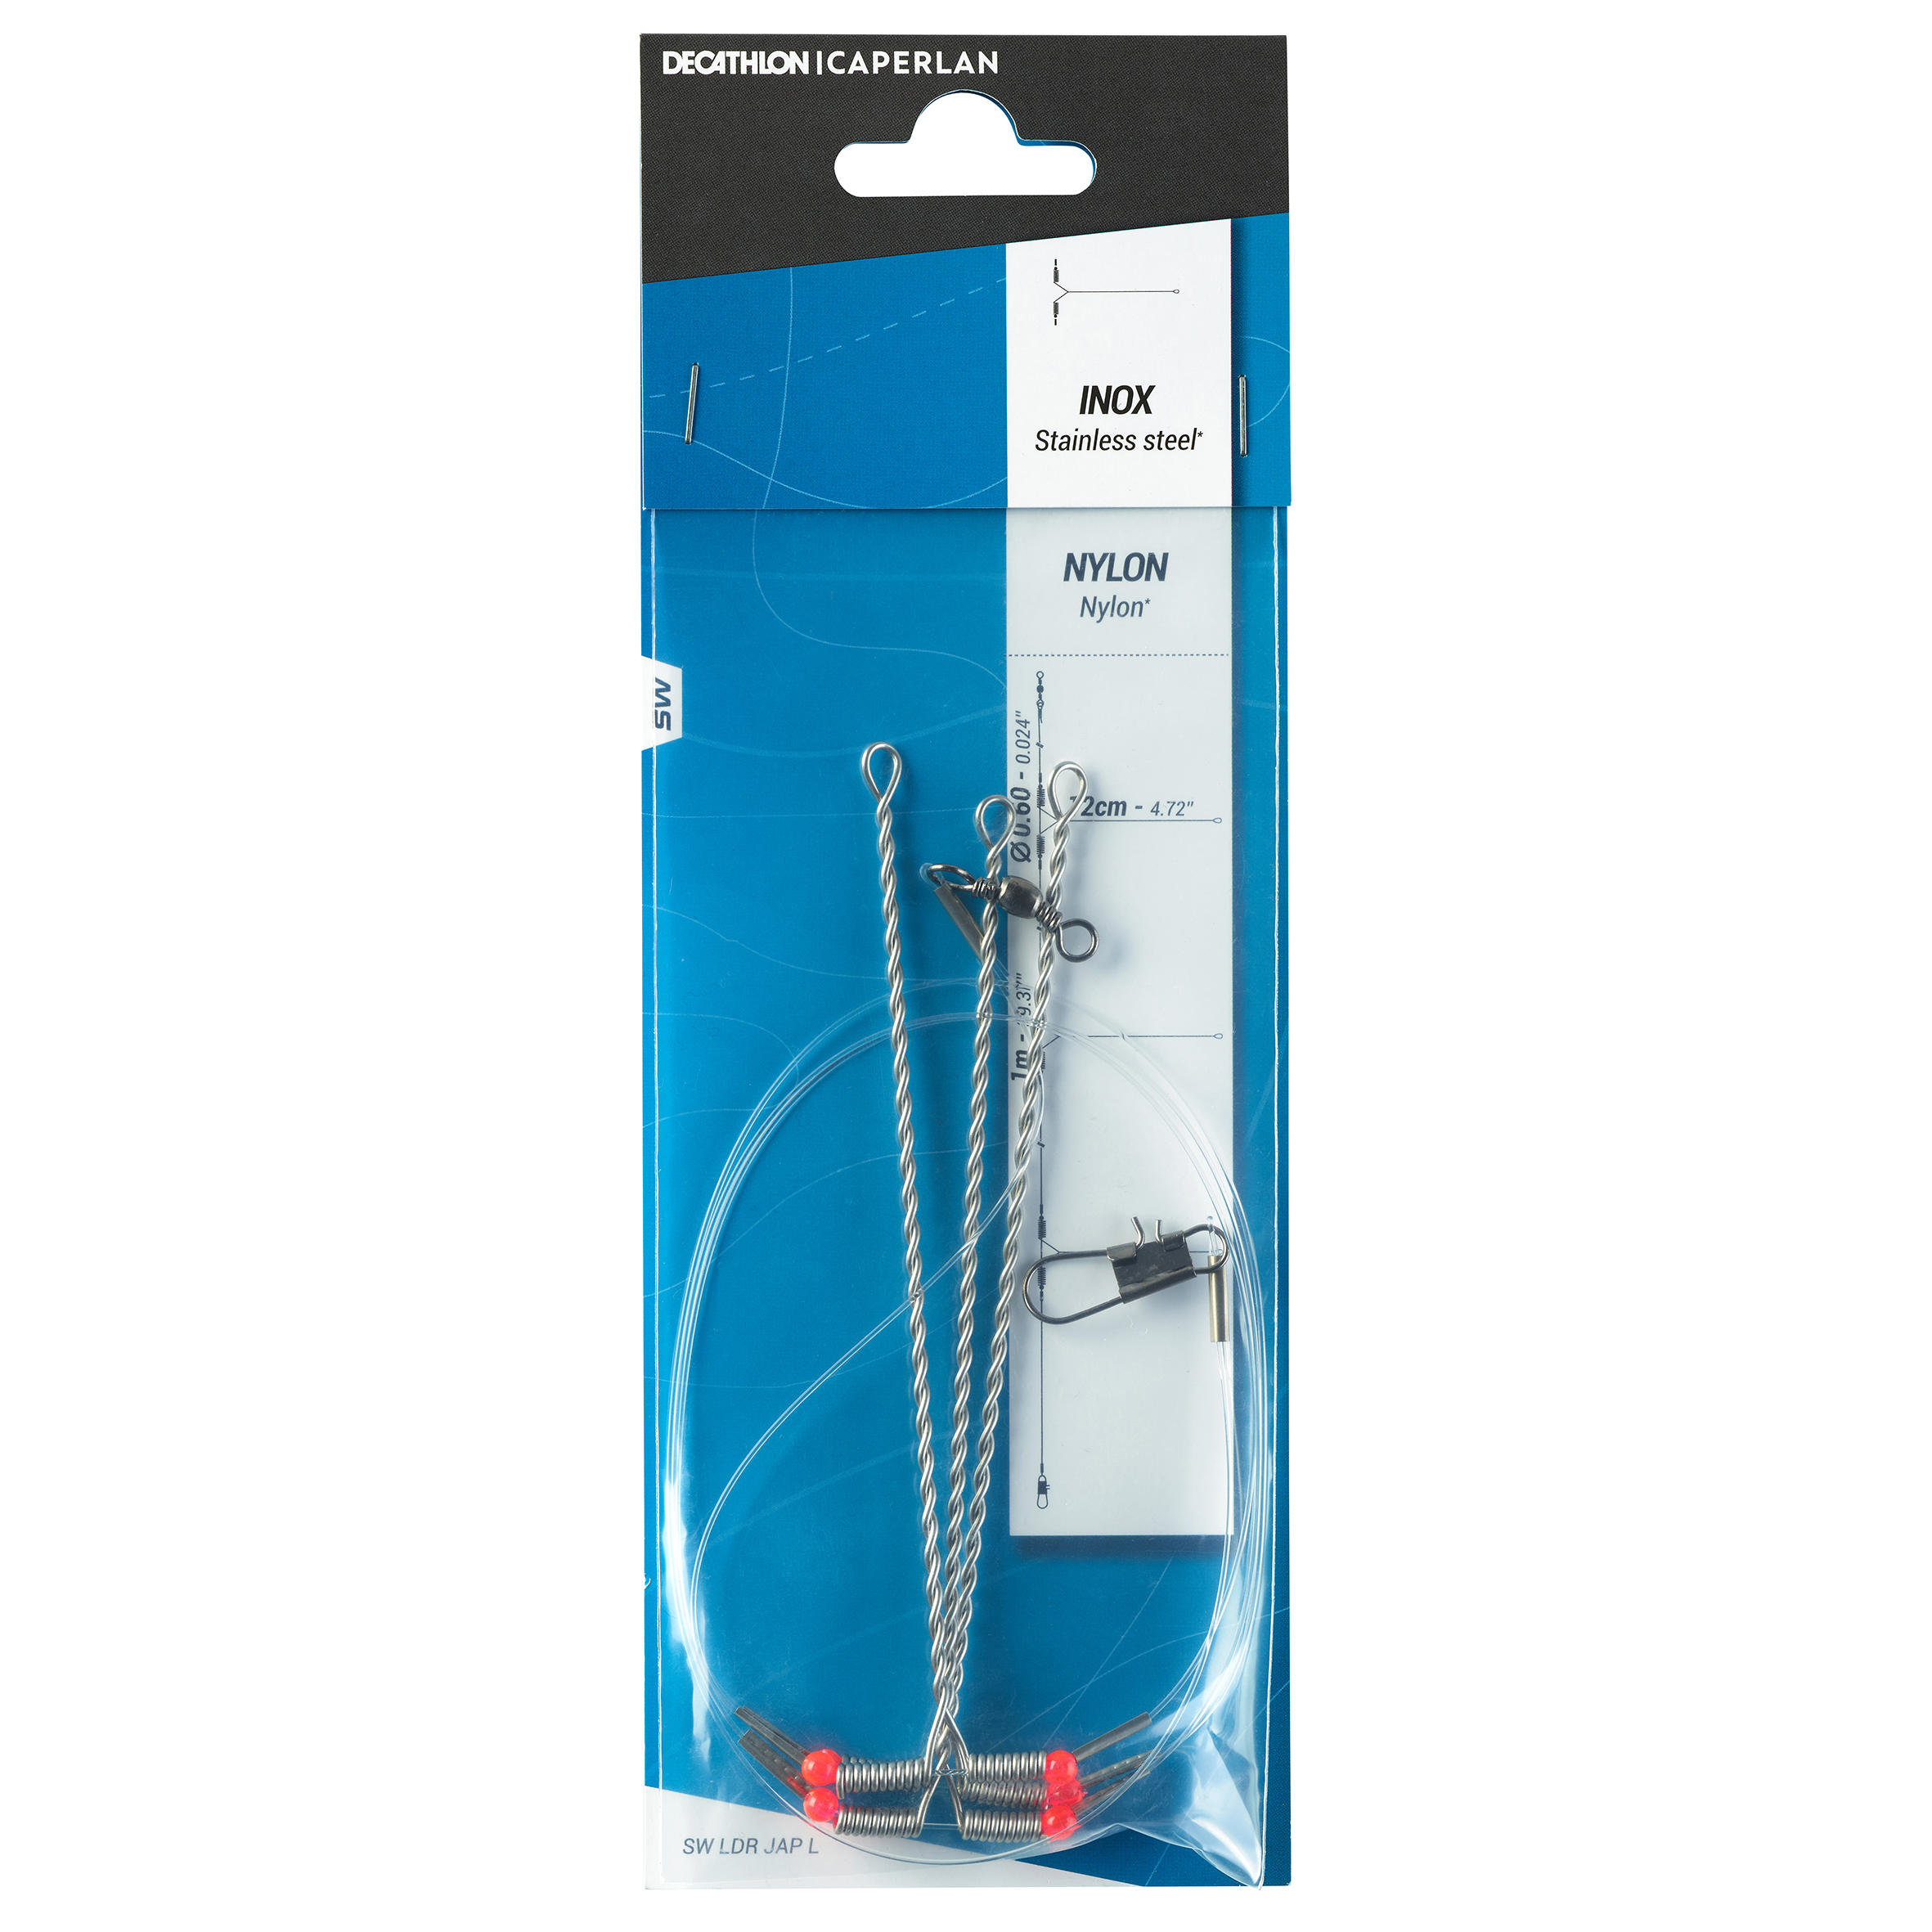 Fishing Stainless Steel Double Snap Clips x10 - Decathlon